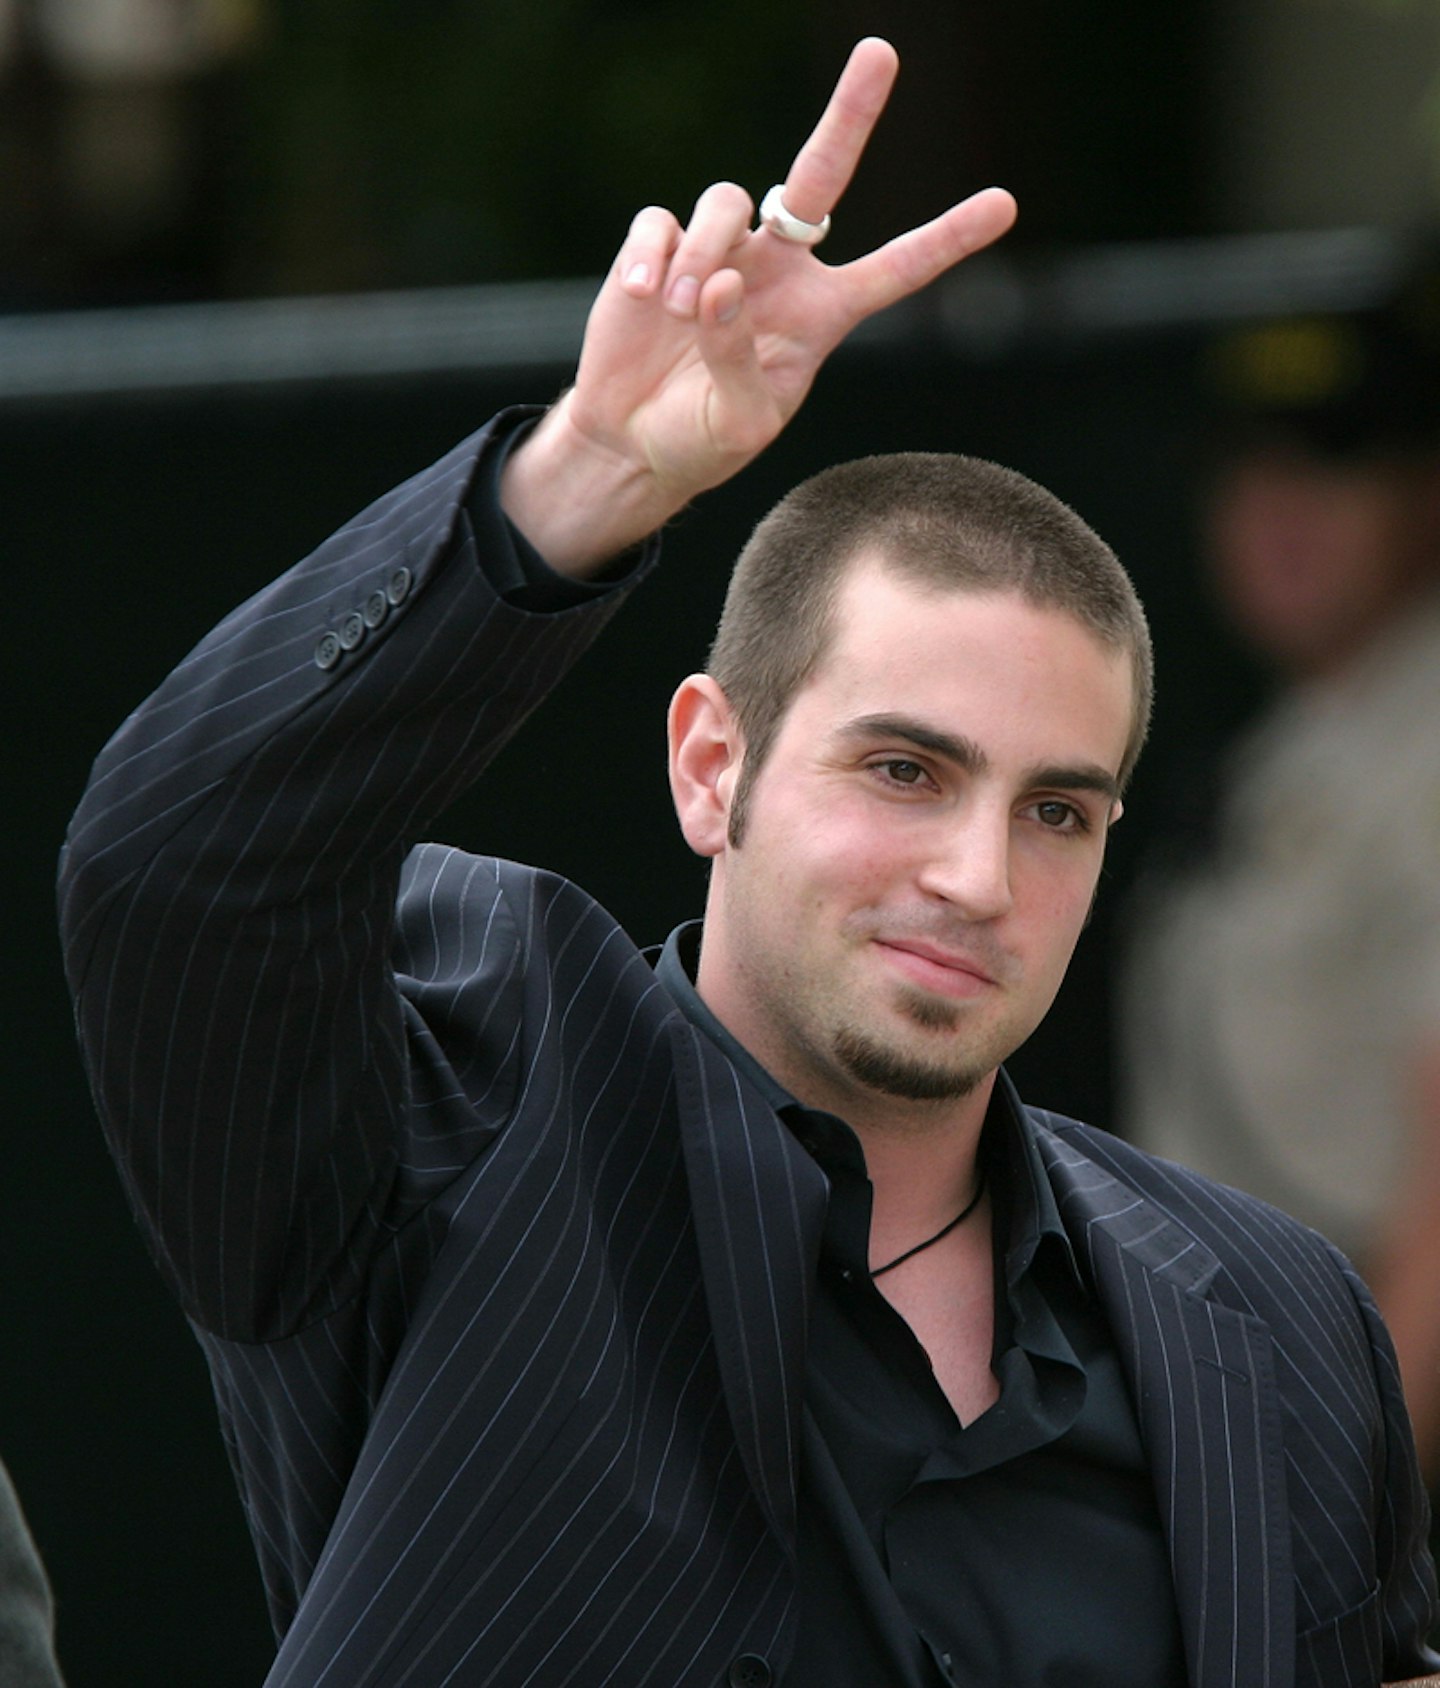 Wade Robson leaving court after 2005 Michael Jackson trial